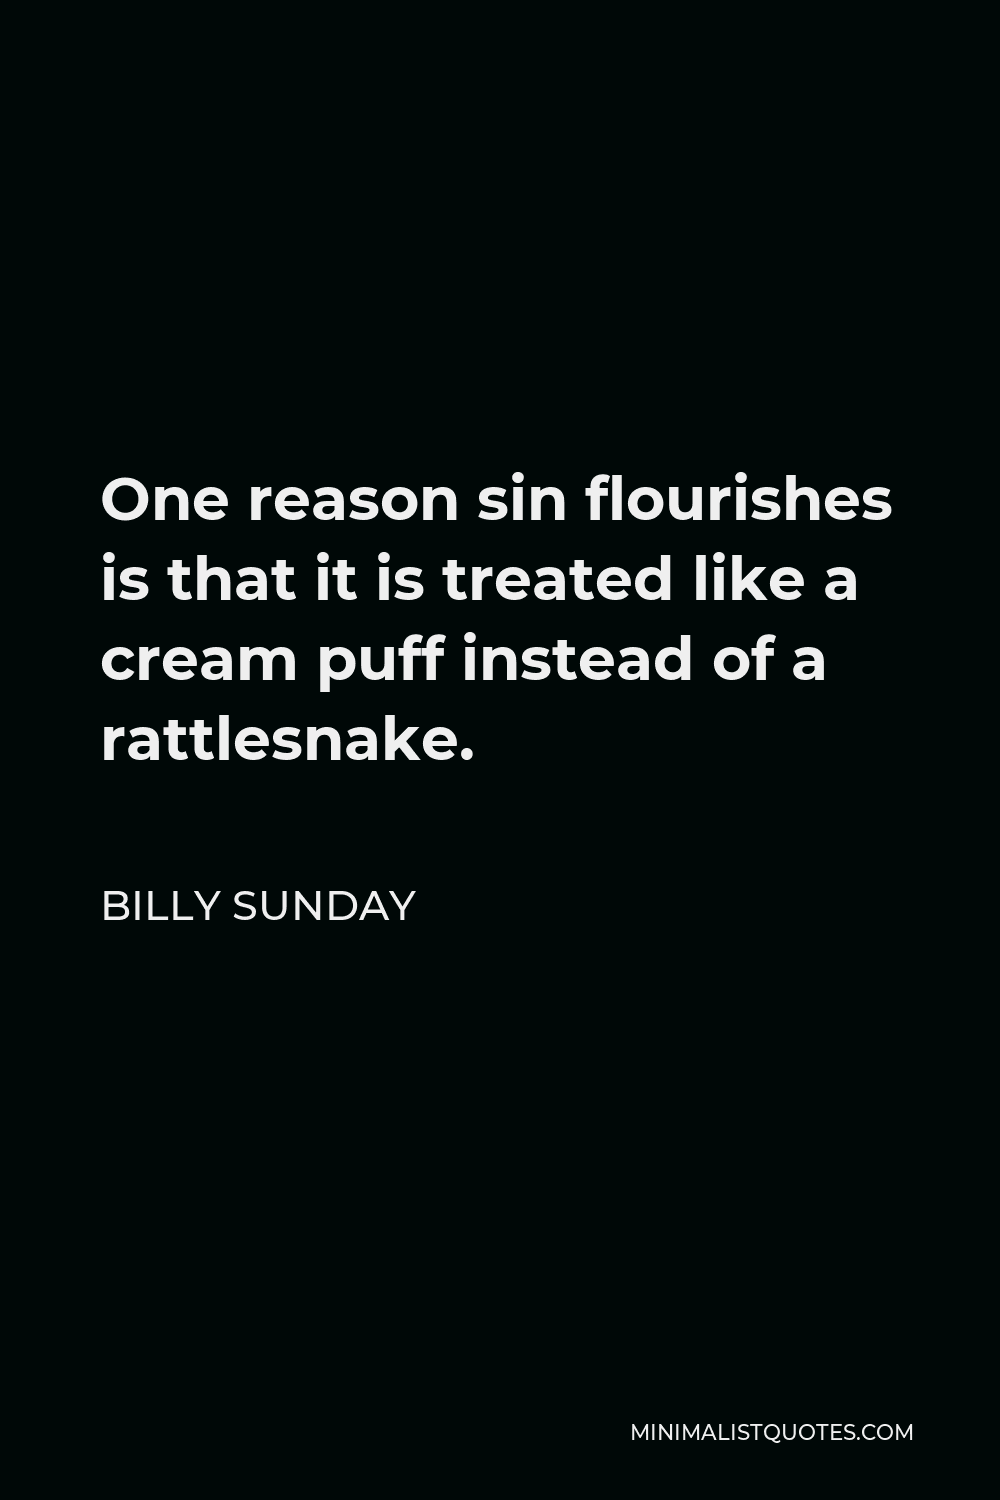 Billy Sunday Quote - One reason sin flourishes is that it is treated like a cream puff instead of a rattlesnake.